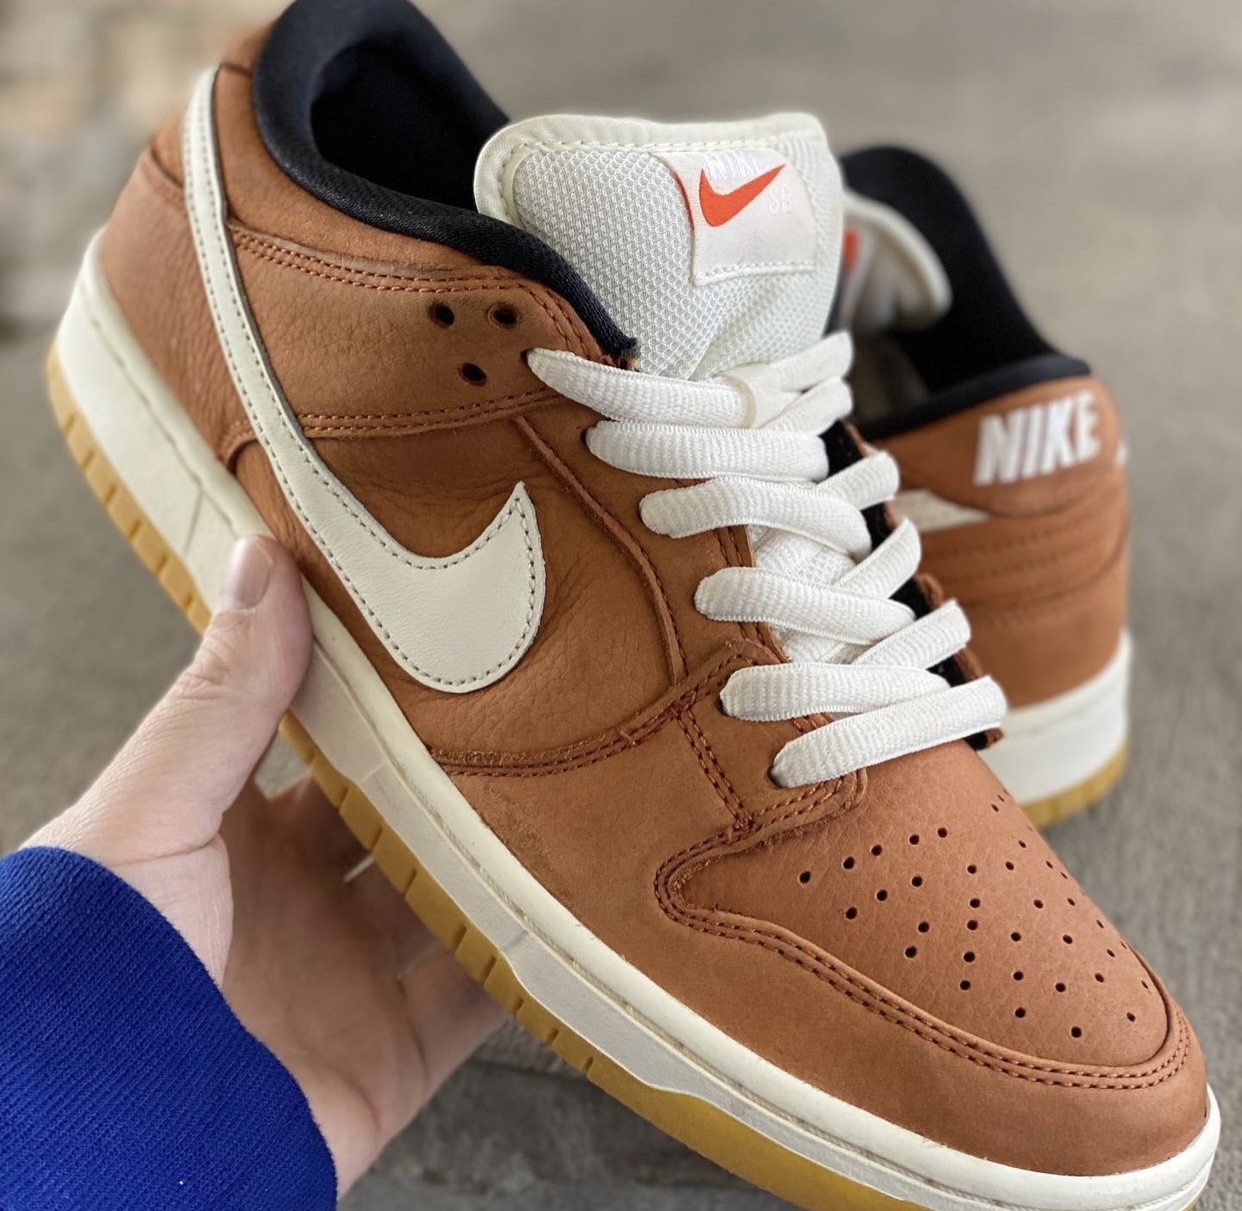 nike dunk baroque brown white horse boots women Dark Russet DH1319-200 Release Date Pricing